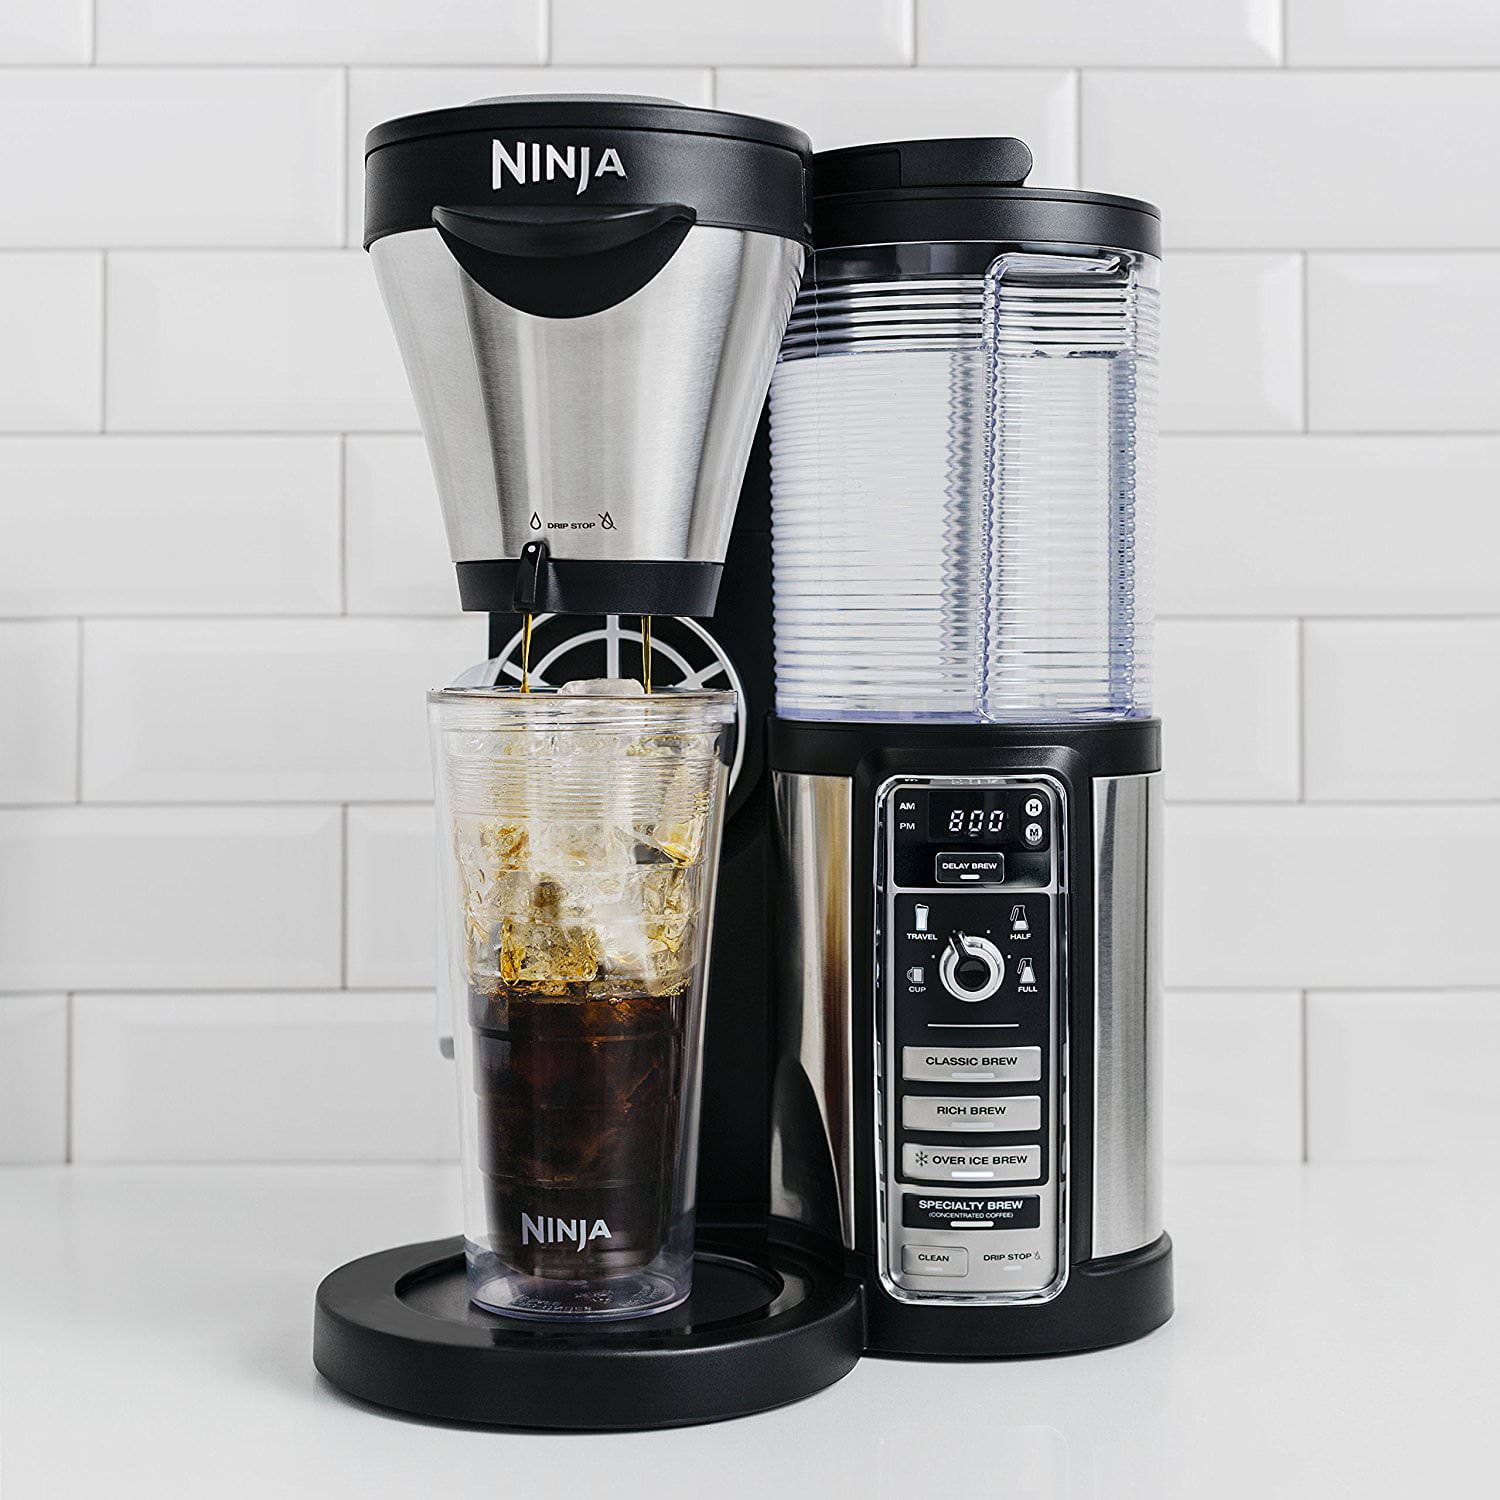 Ninja Hot & Cold Brewed System™ with Thermal Carafe, Coffee Maker